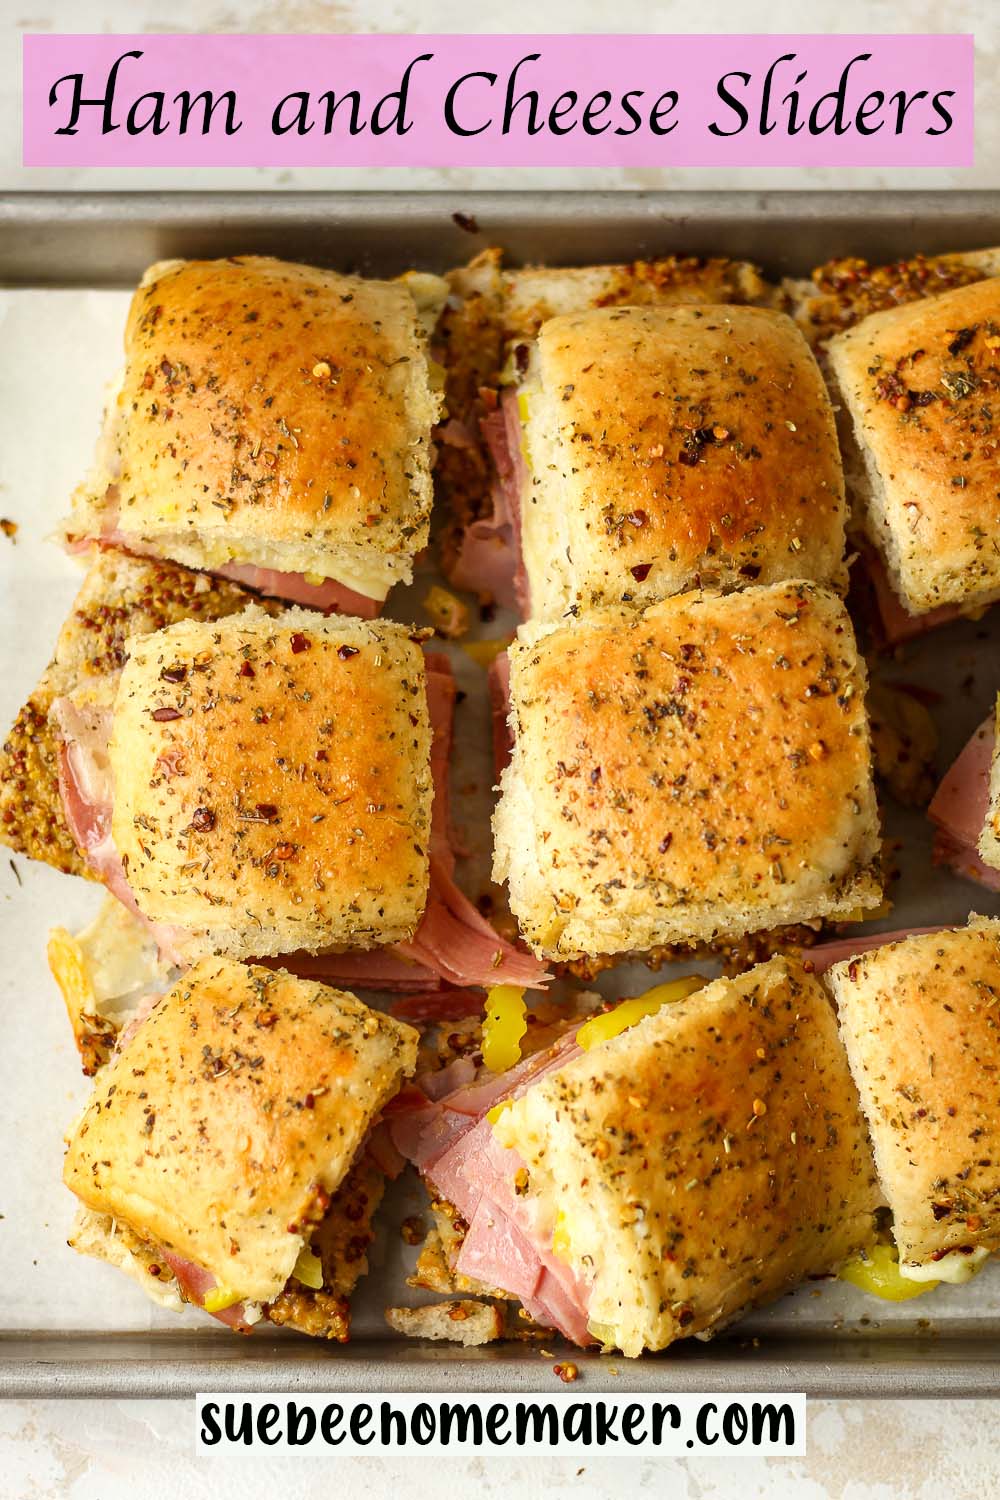 Some sliced ham and cheese sliders on a pan.